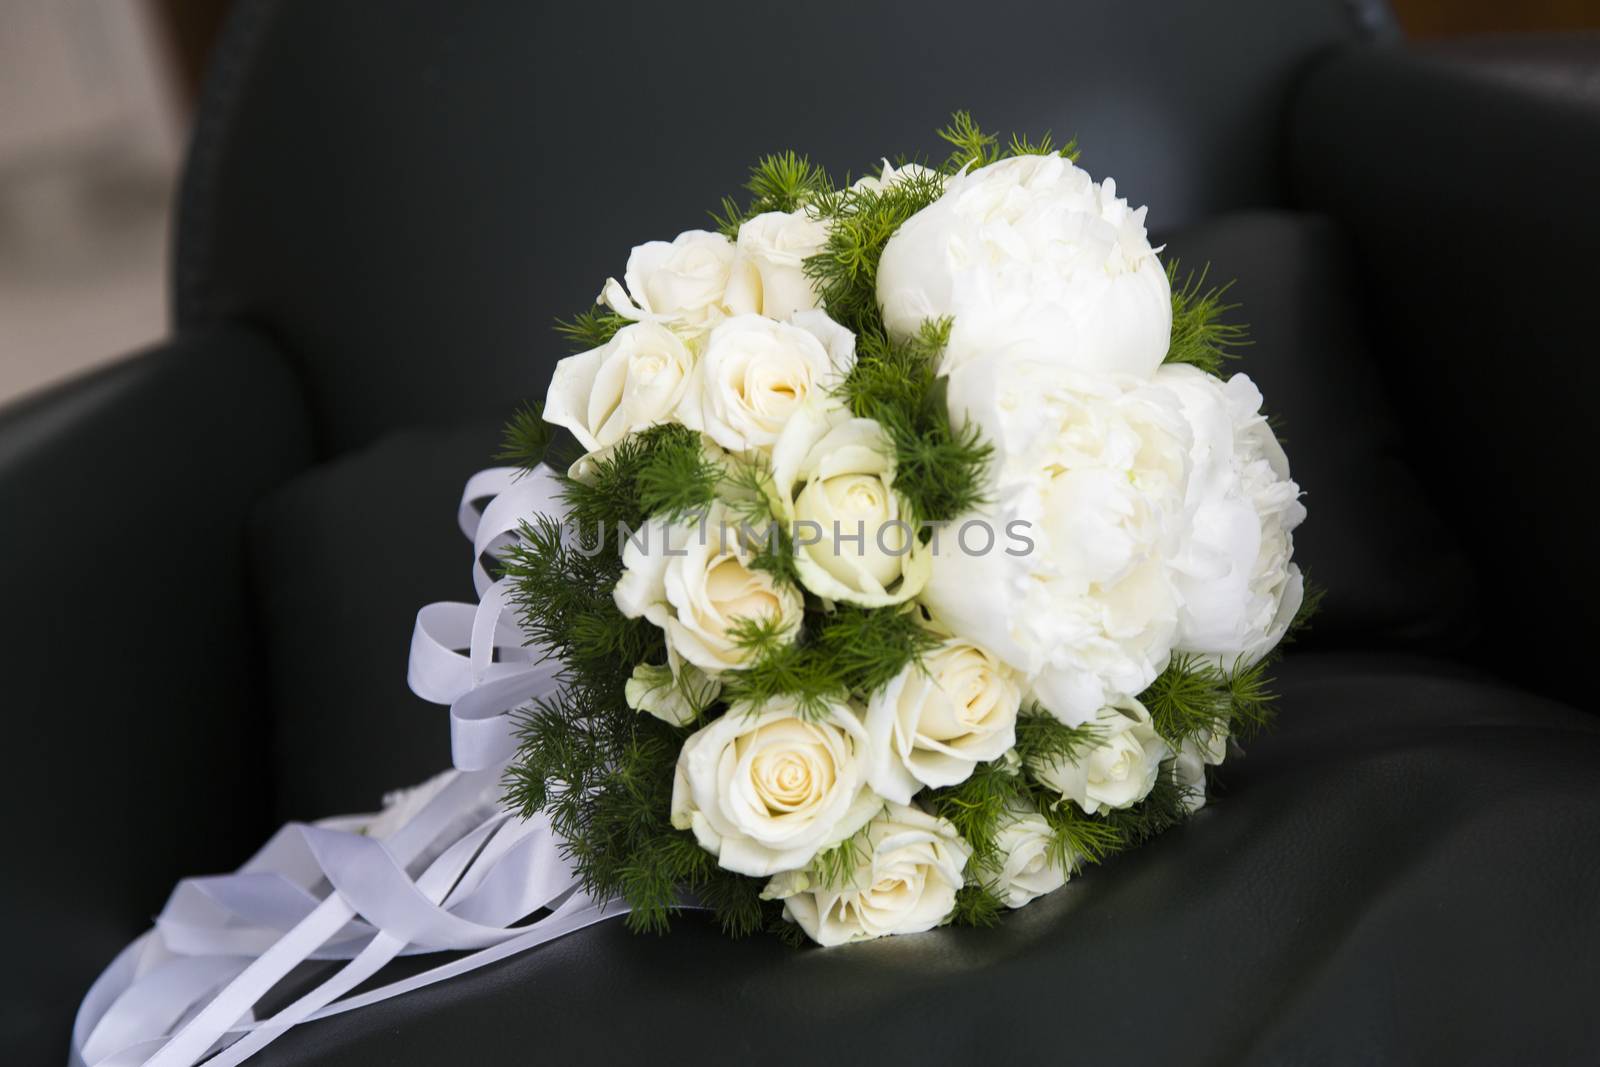 Close up view of a bridal bouquet put an armchair in a living room